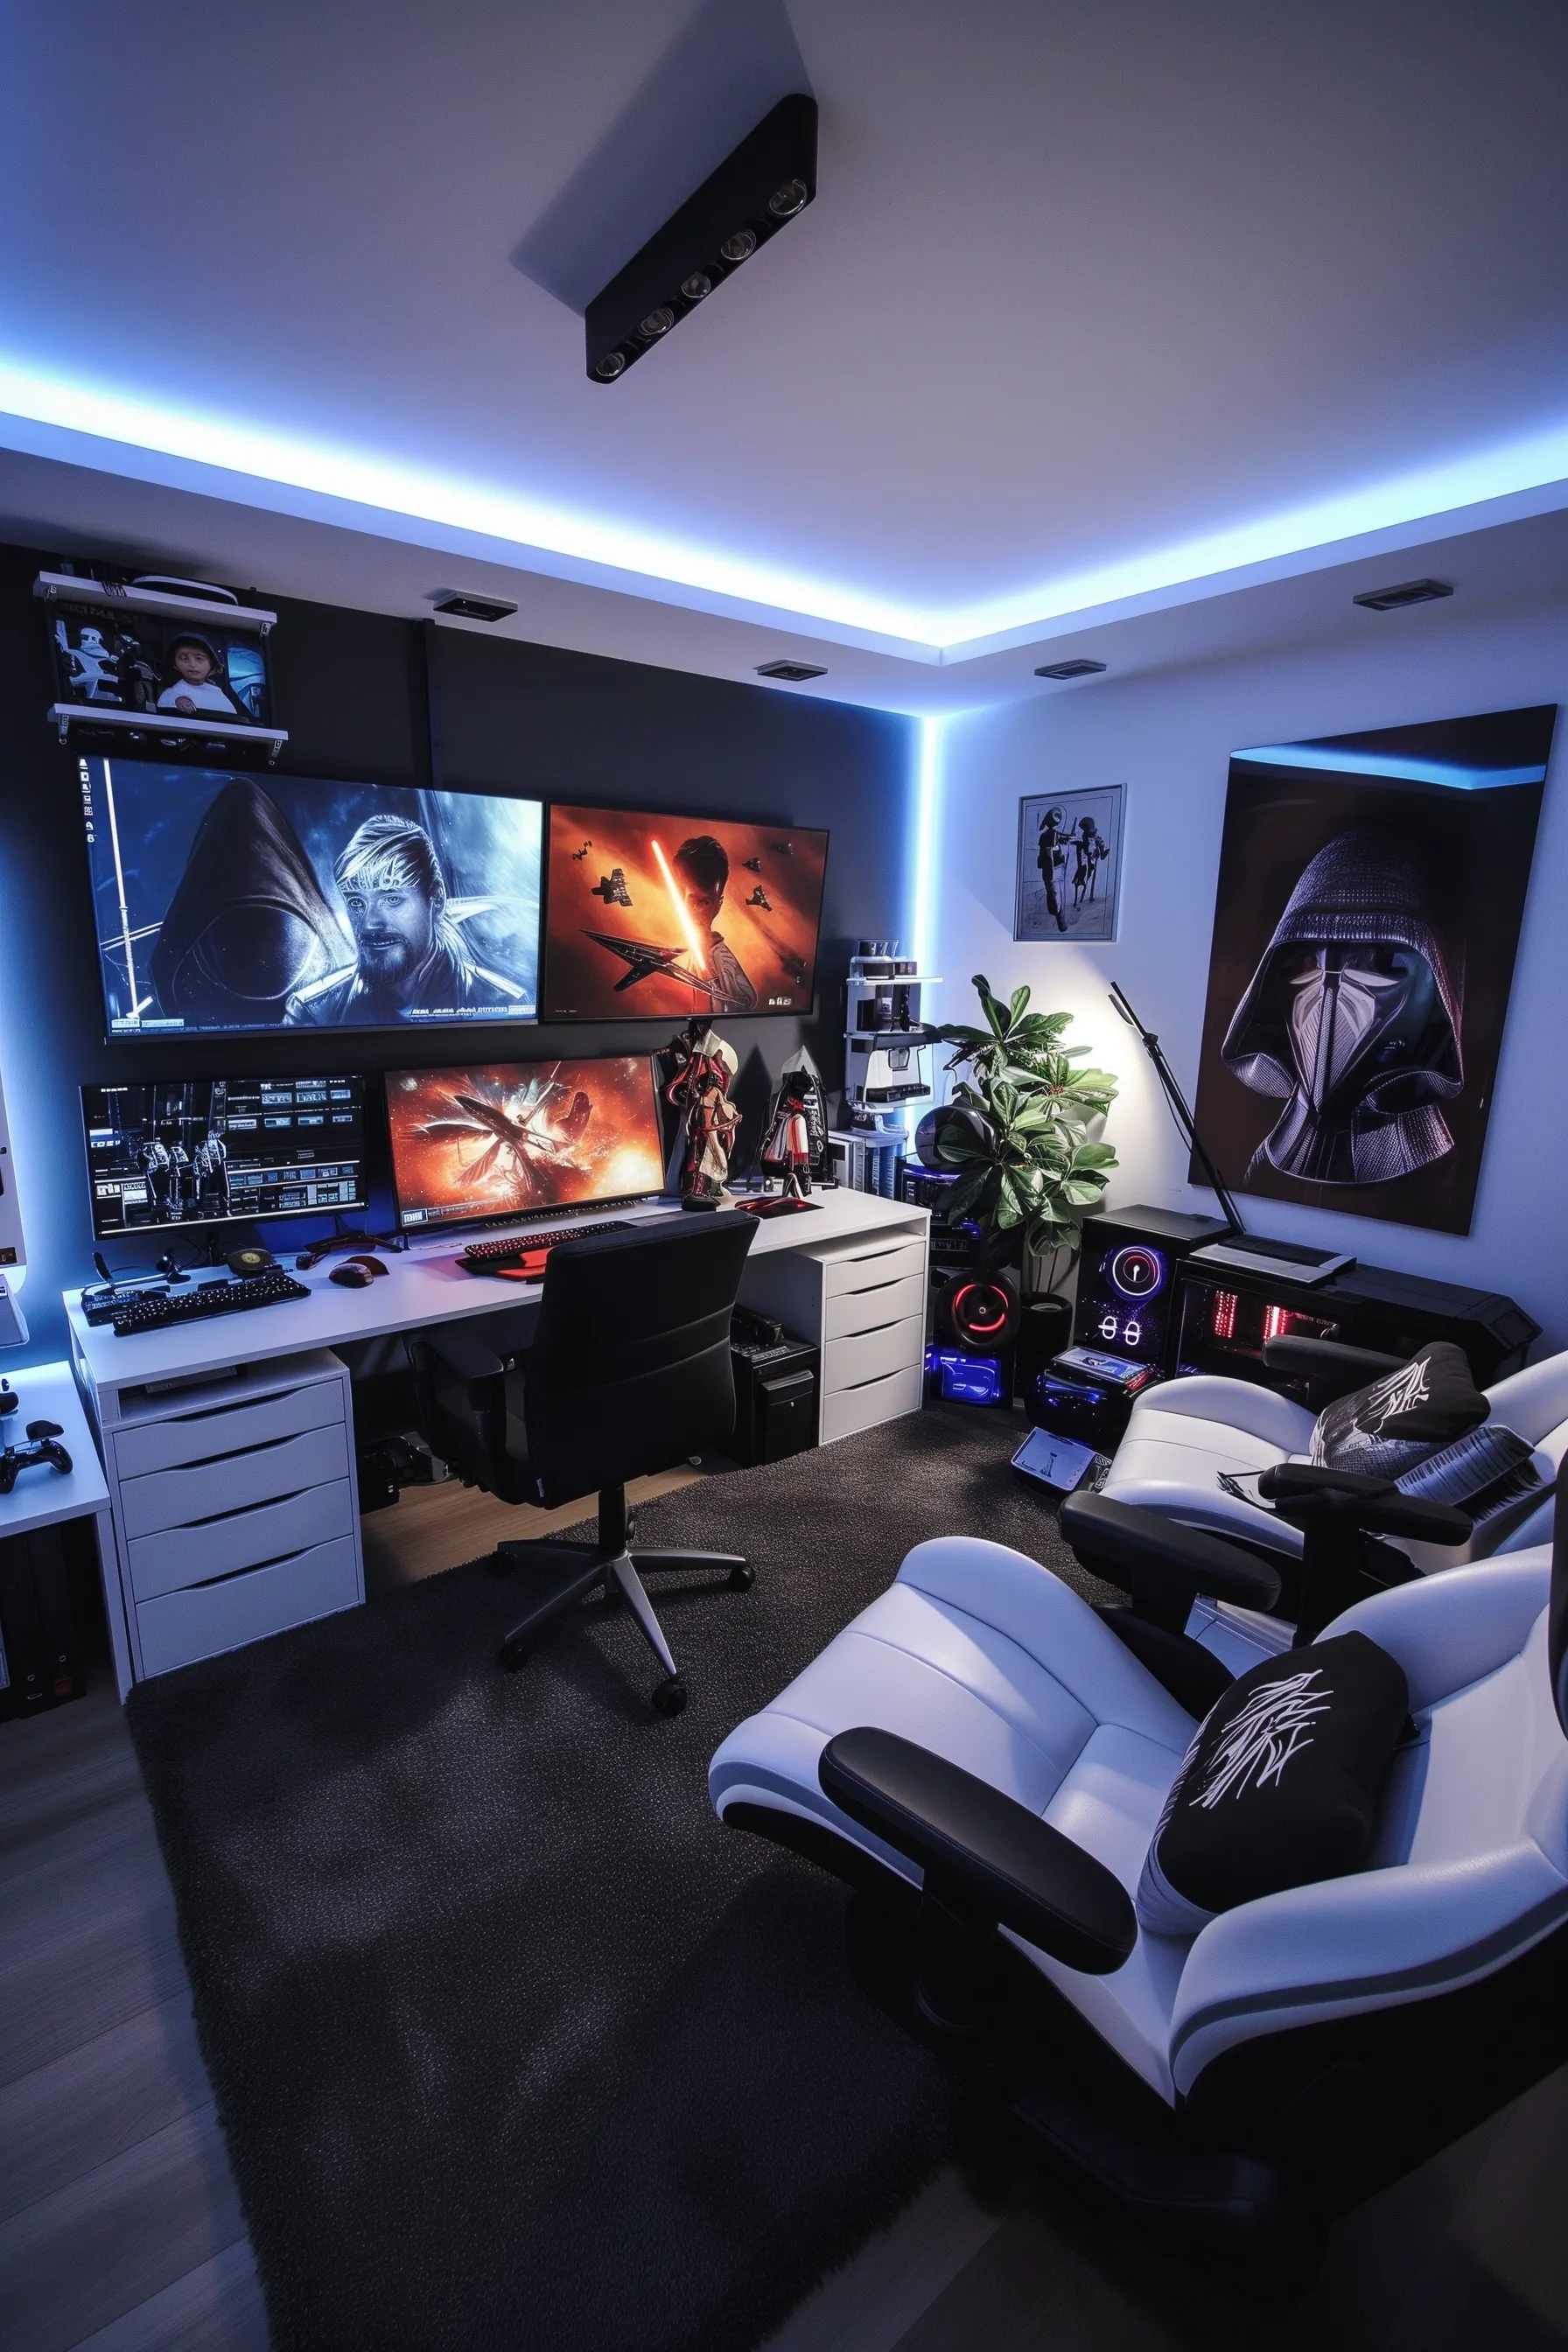 White reclining game chairs and star wars posters